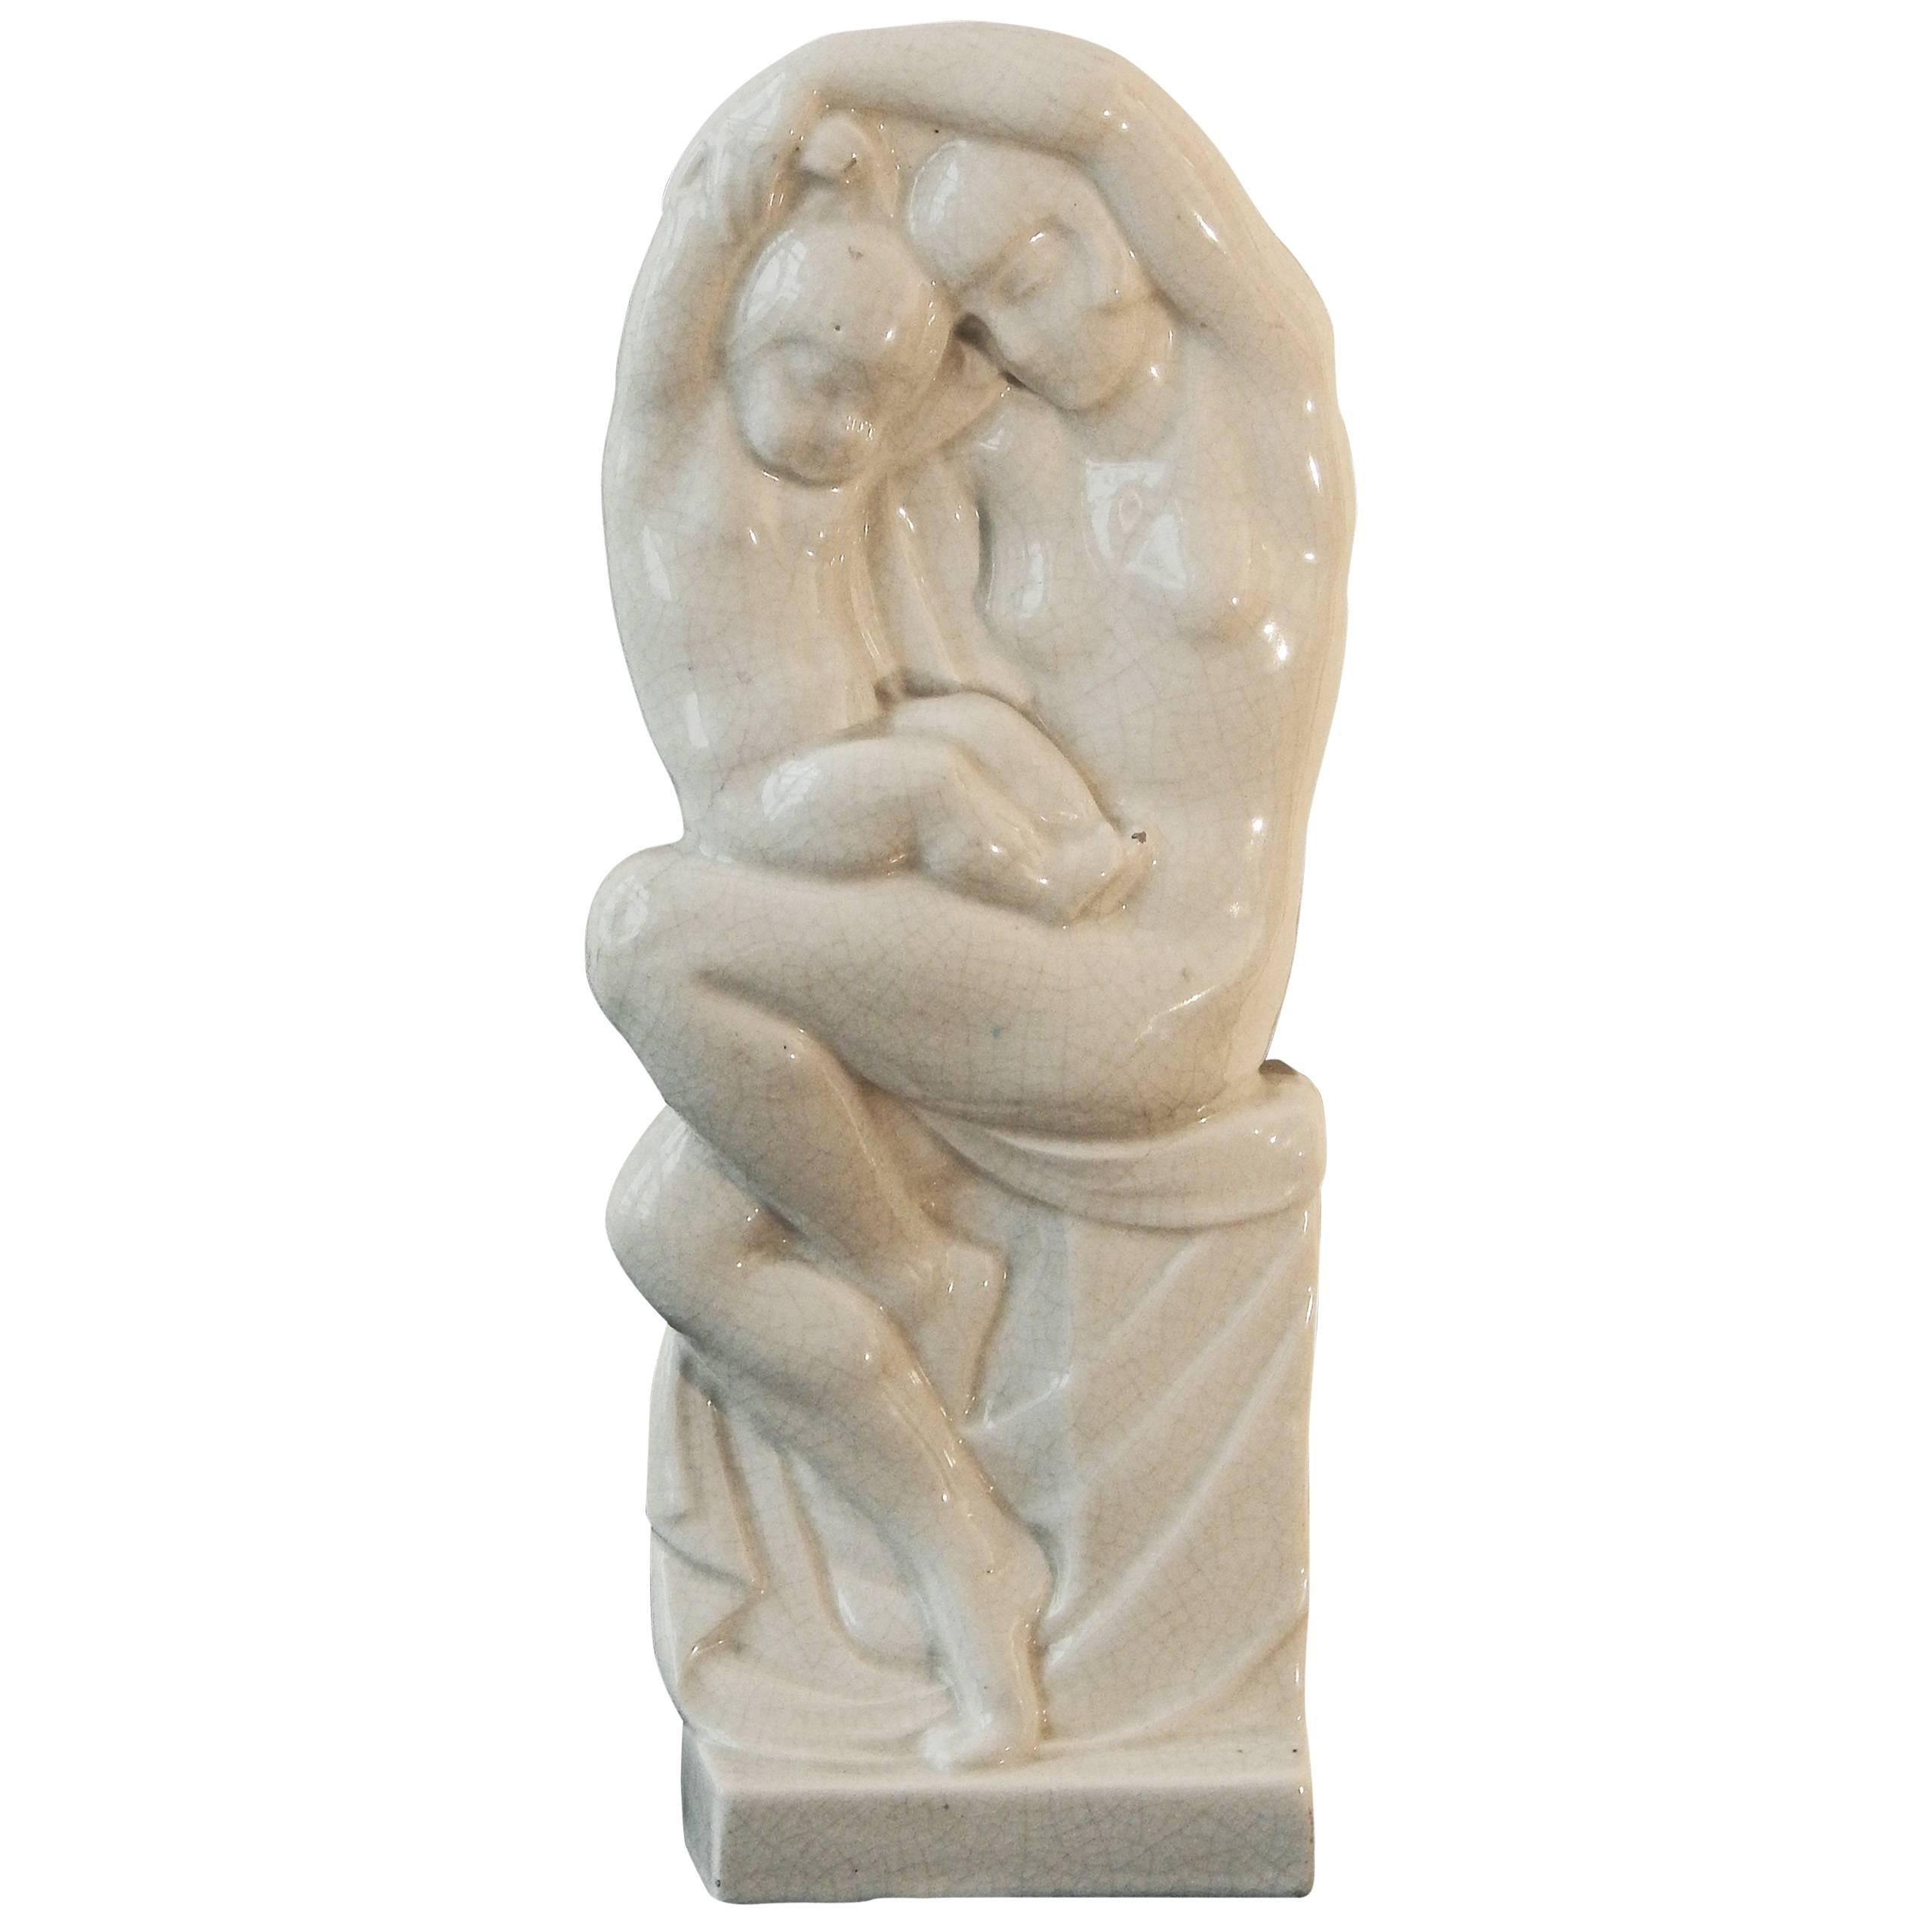 "Mother and Child, " Rare Art Deco Sculpture by R. Abel Philippe